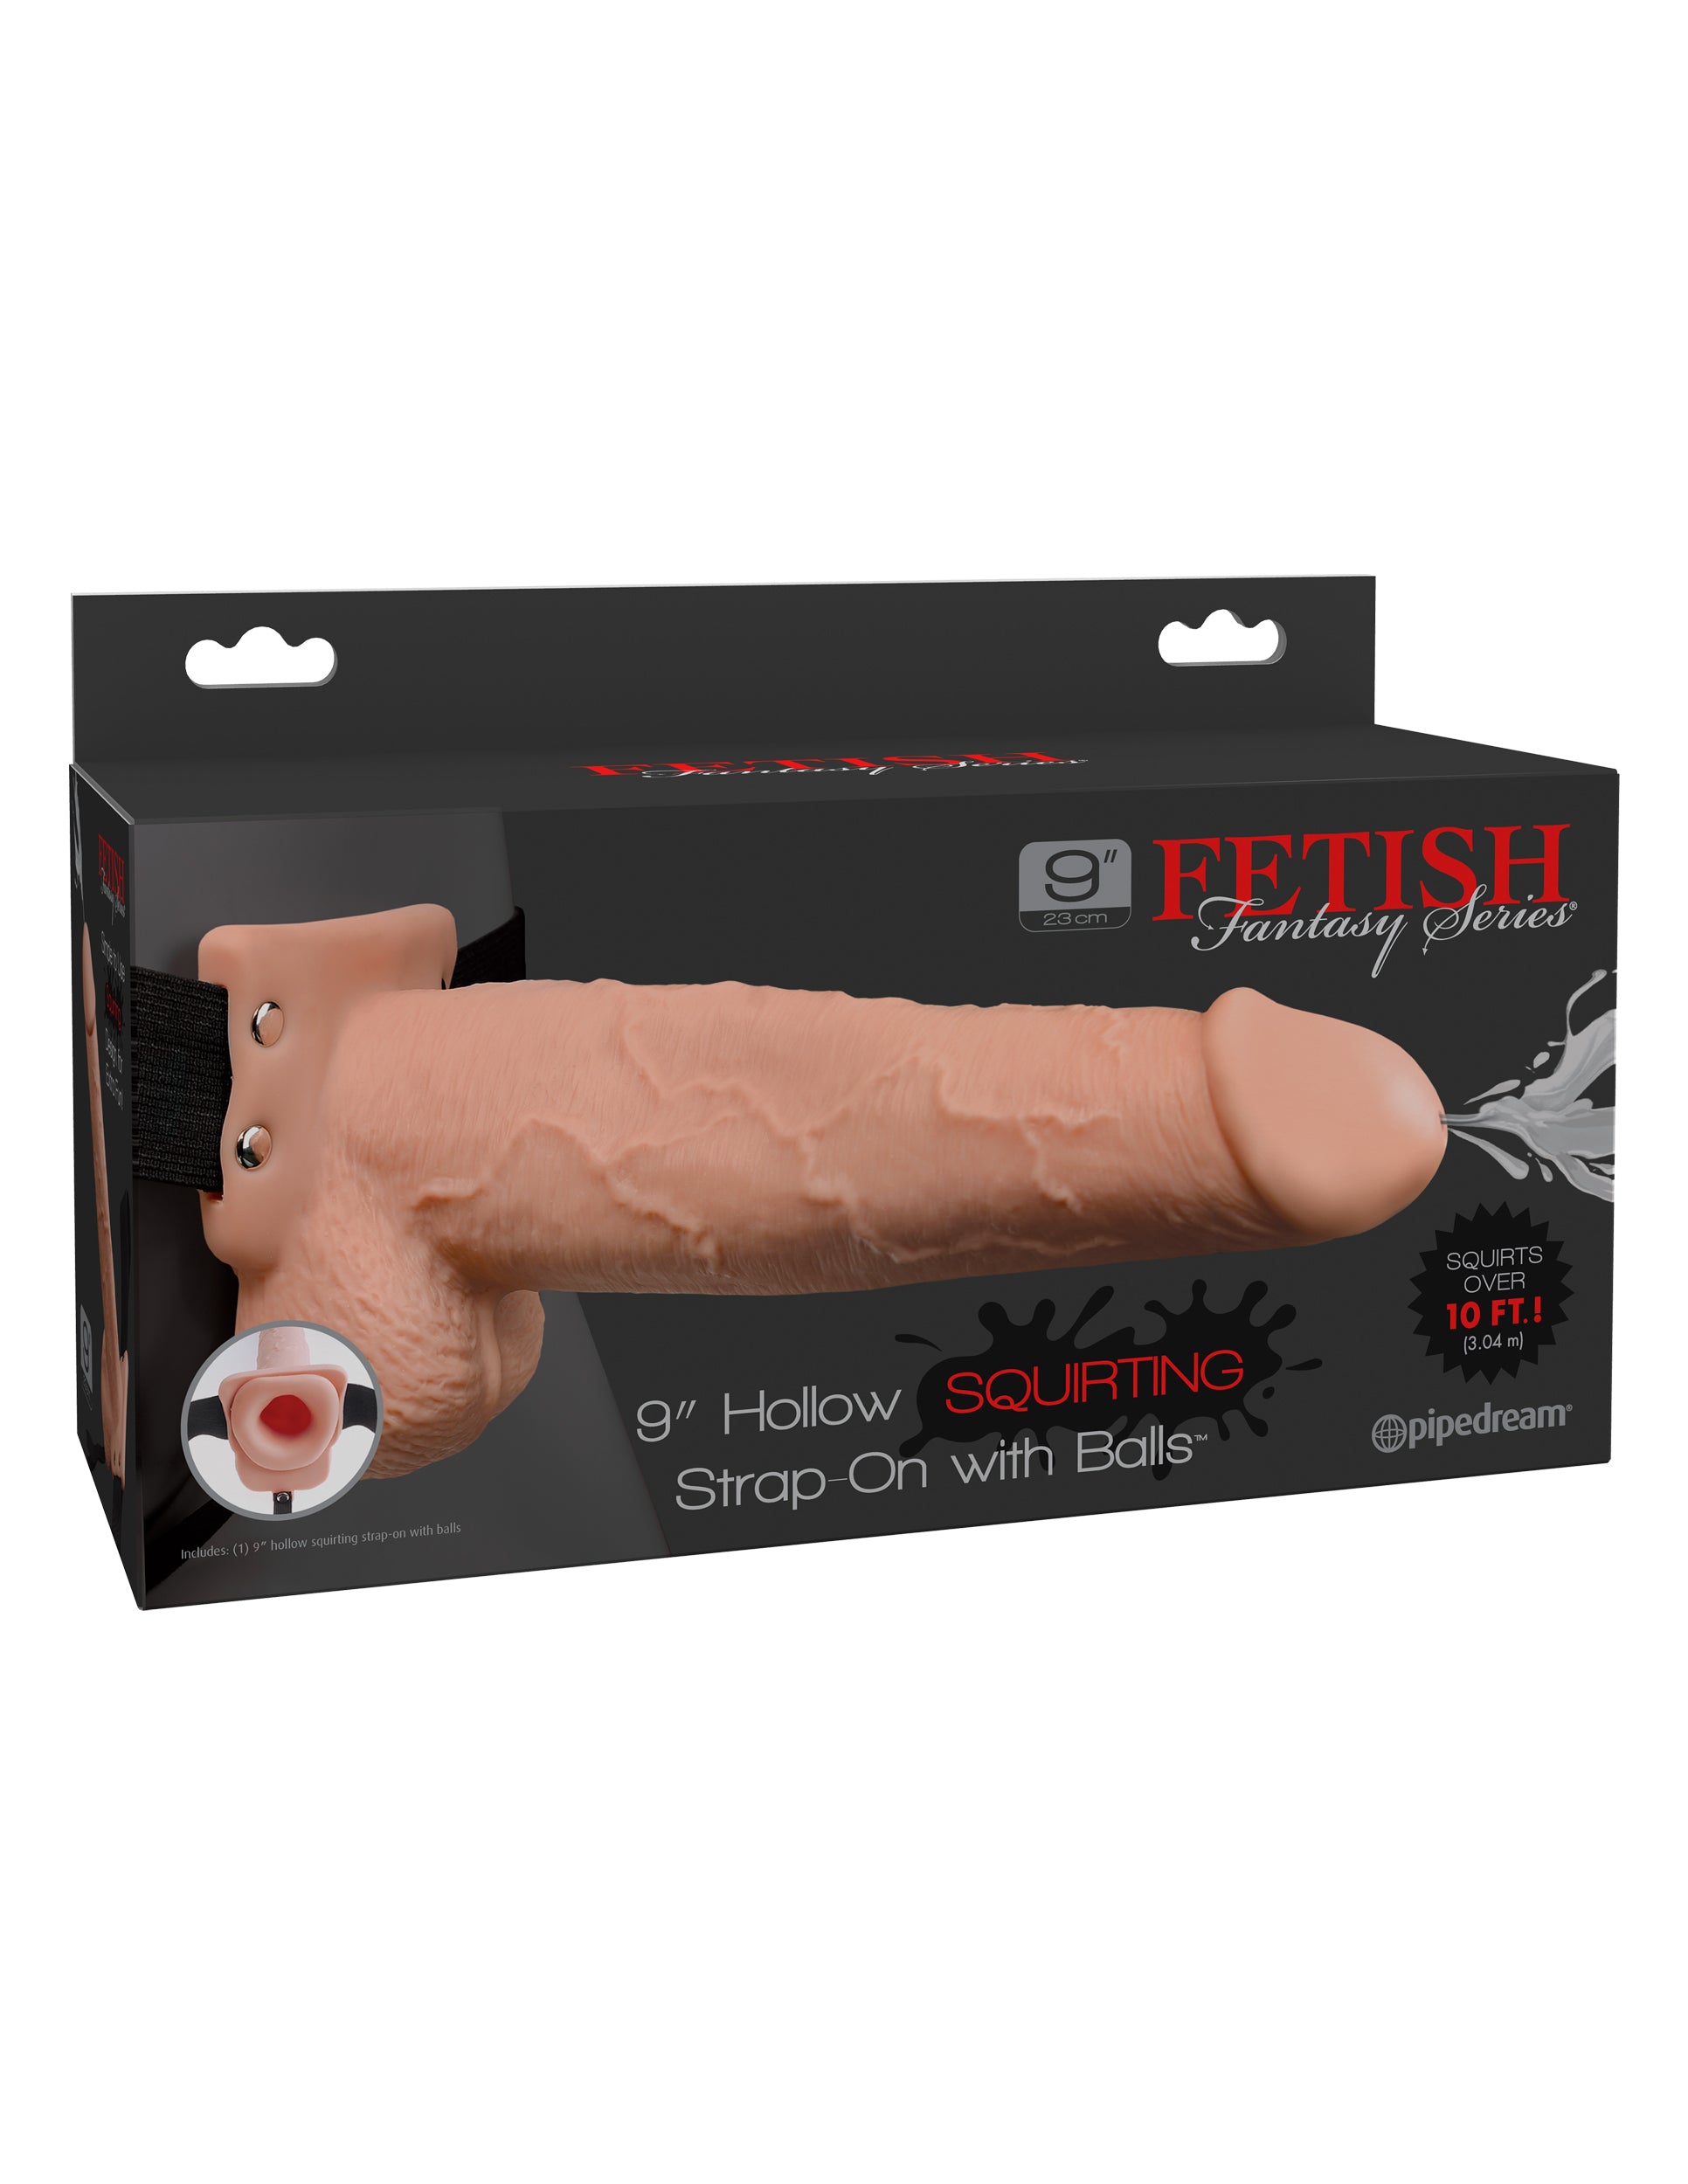 Fetish Fantasy Series 9" Hollow Squirting Strap-on With Balls - Flesh PD3398-21